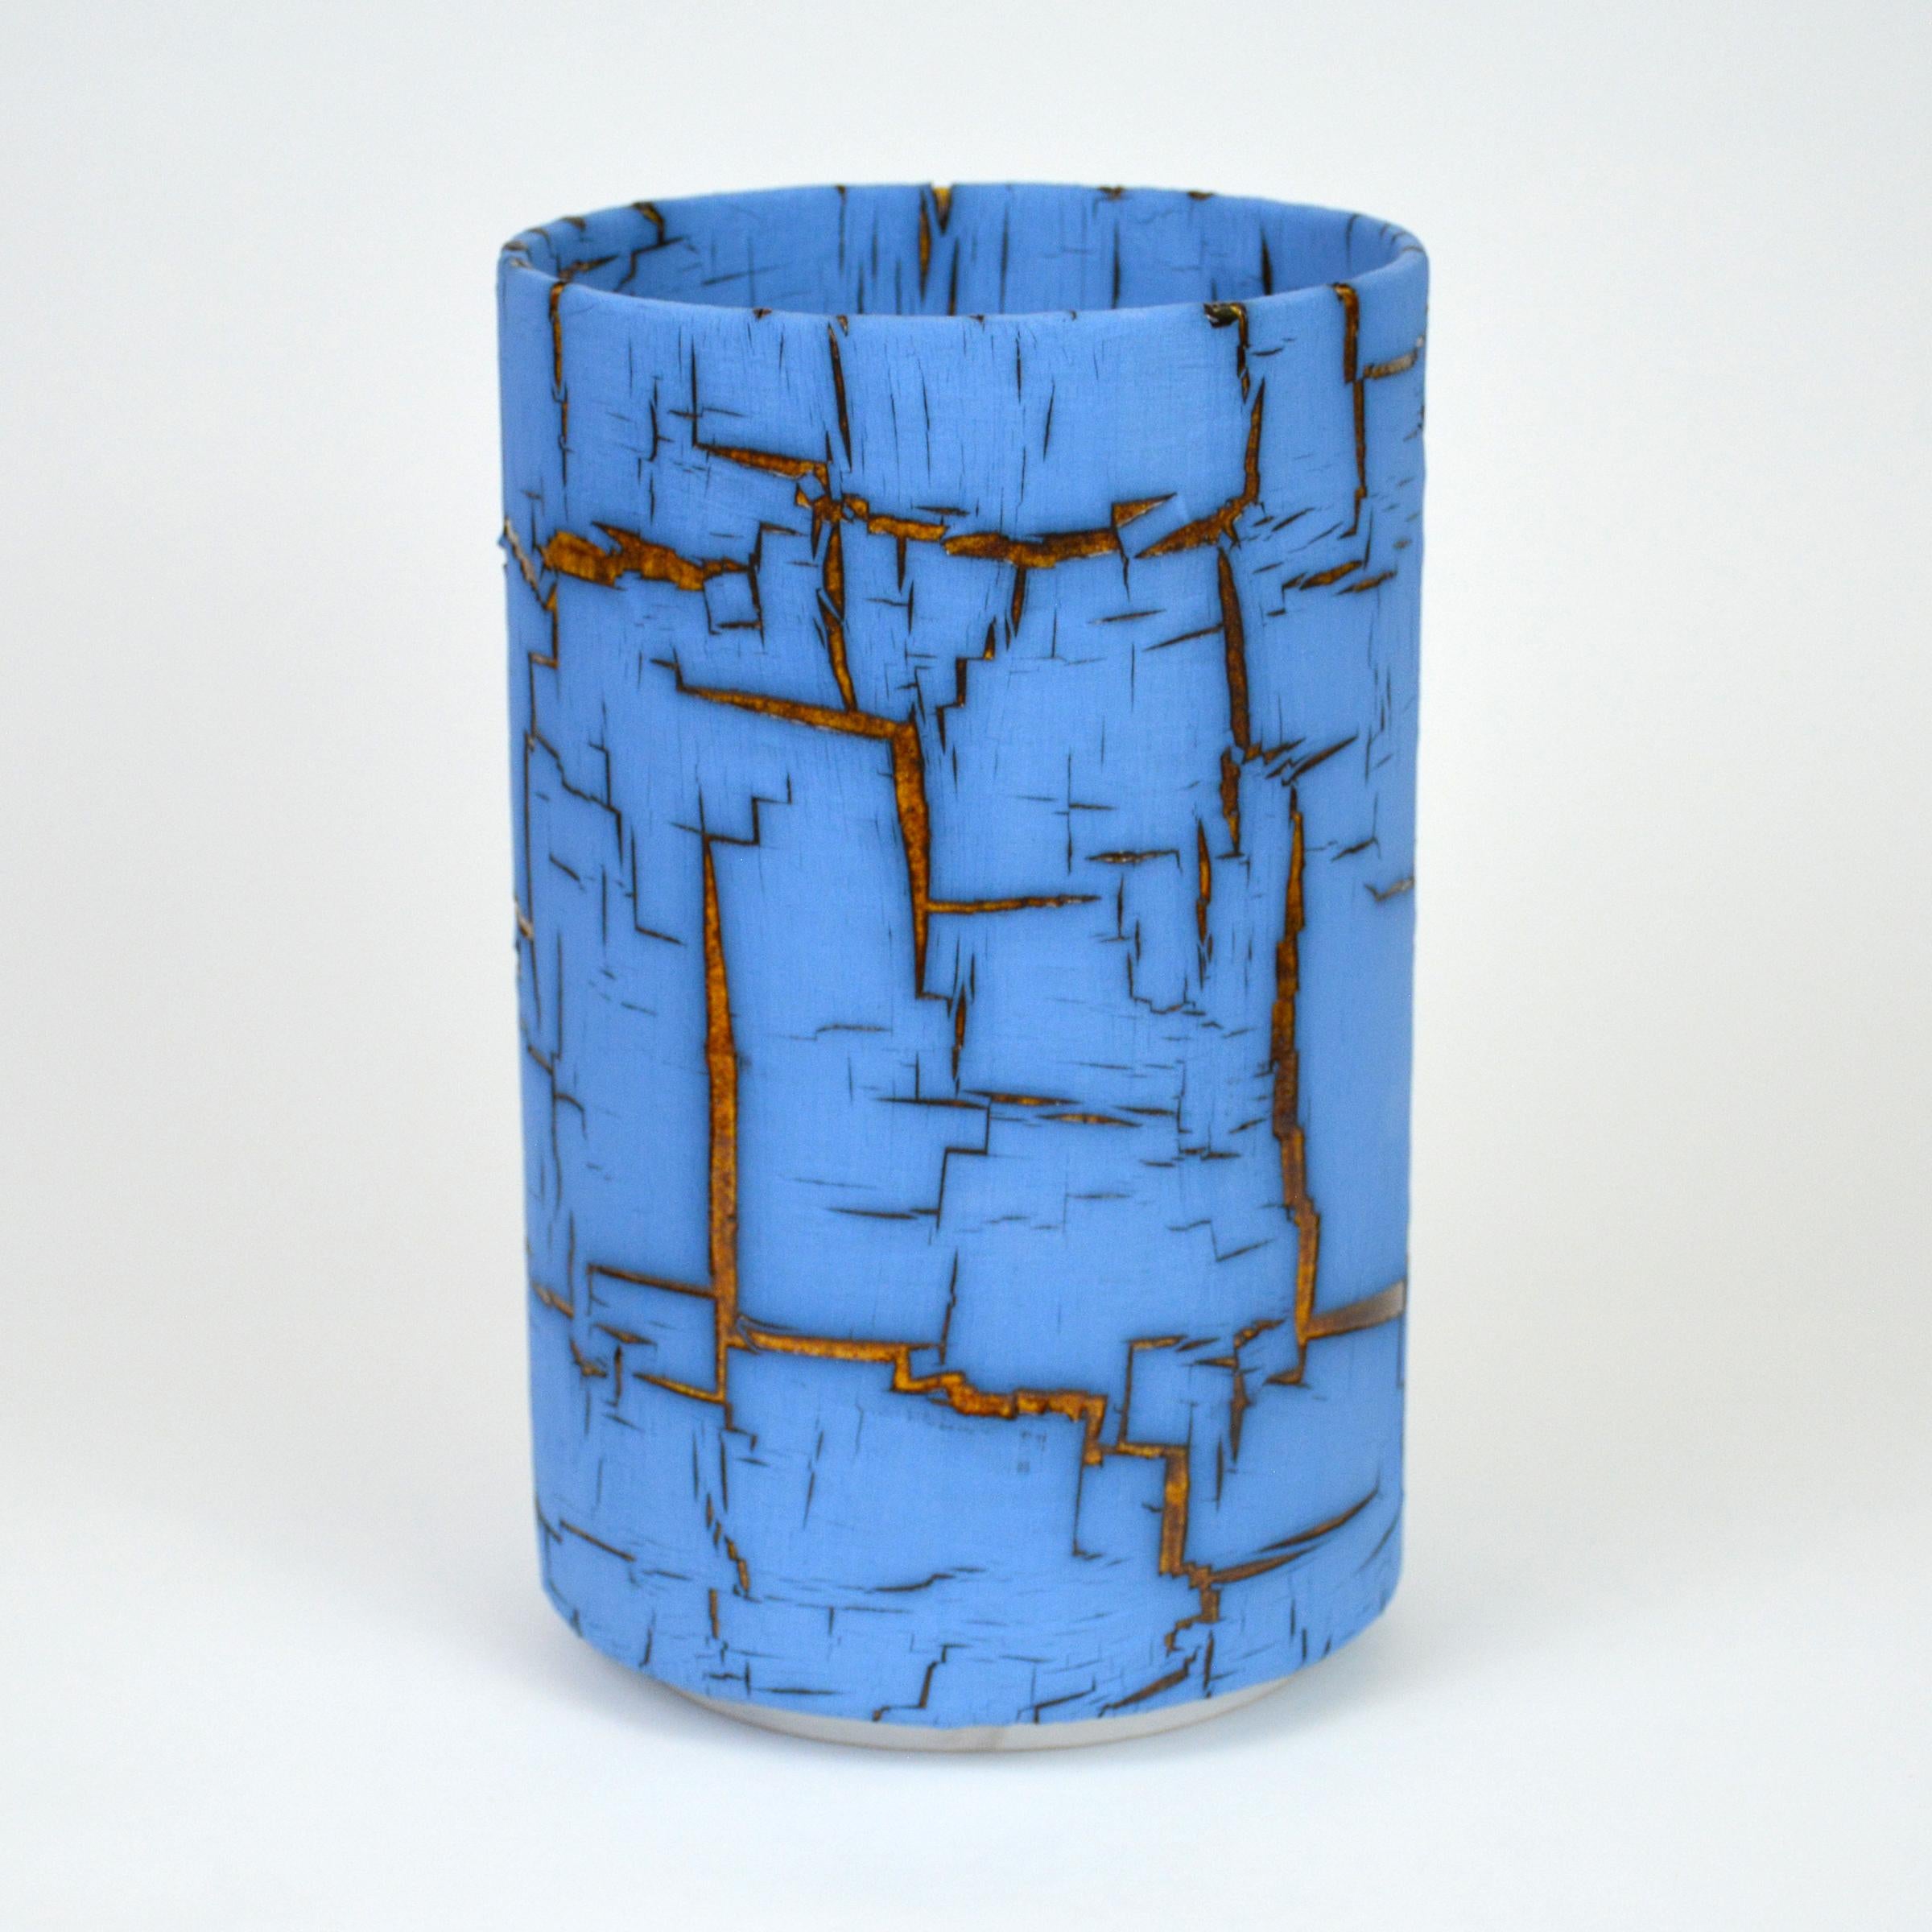 Glazed ceramic cylindrical sculpture by William Edwards
Hand built earthenware vessel, fired multiple times to achieve a textured surface of random abstraction, Blue matte with amber gloss glaze breaking through.

William received his BFA in